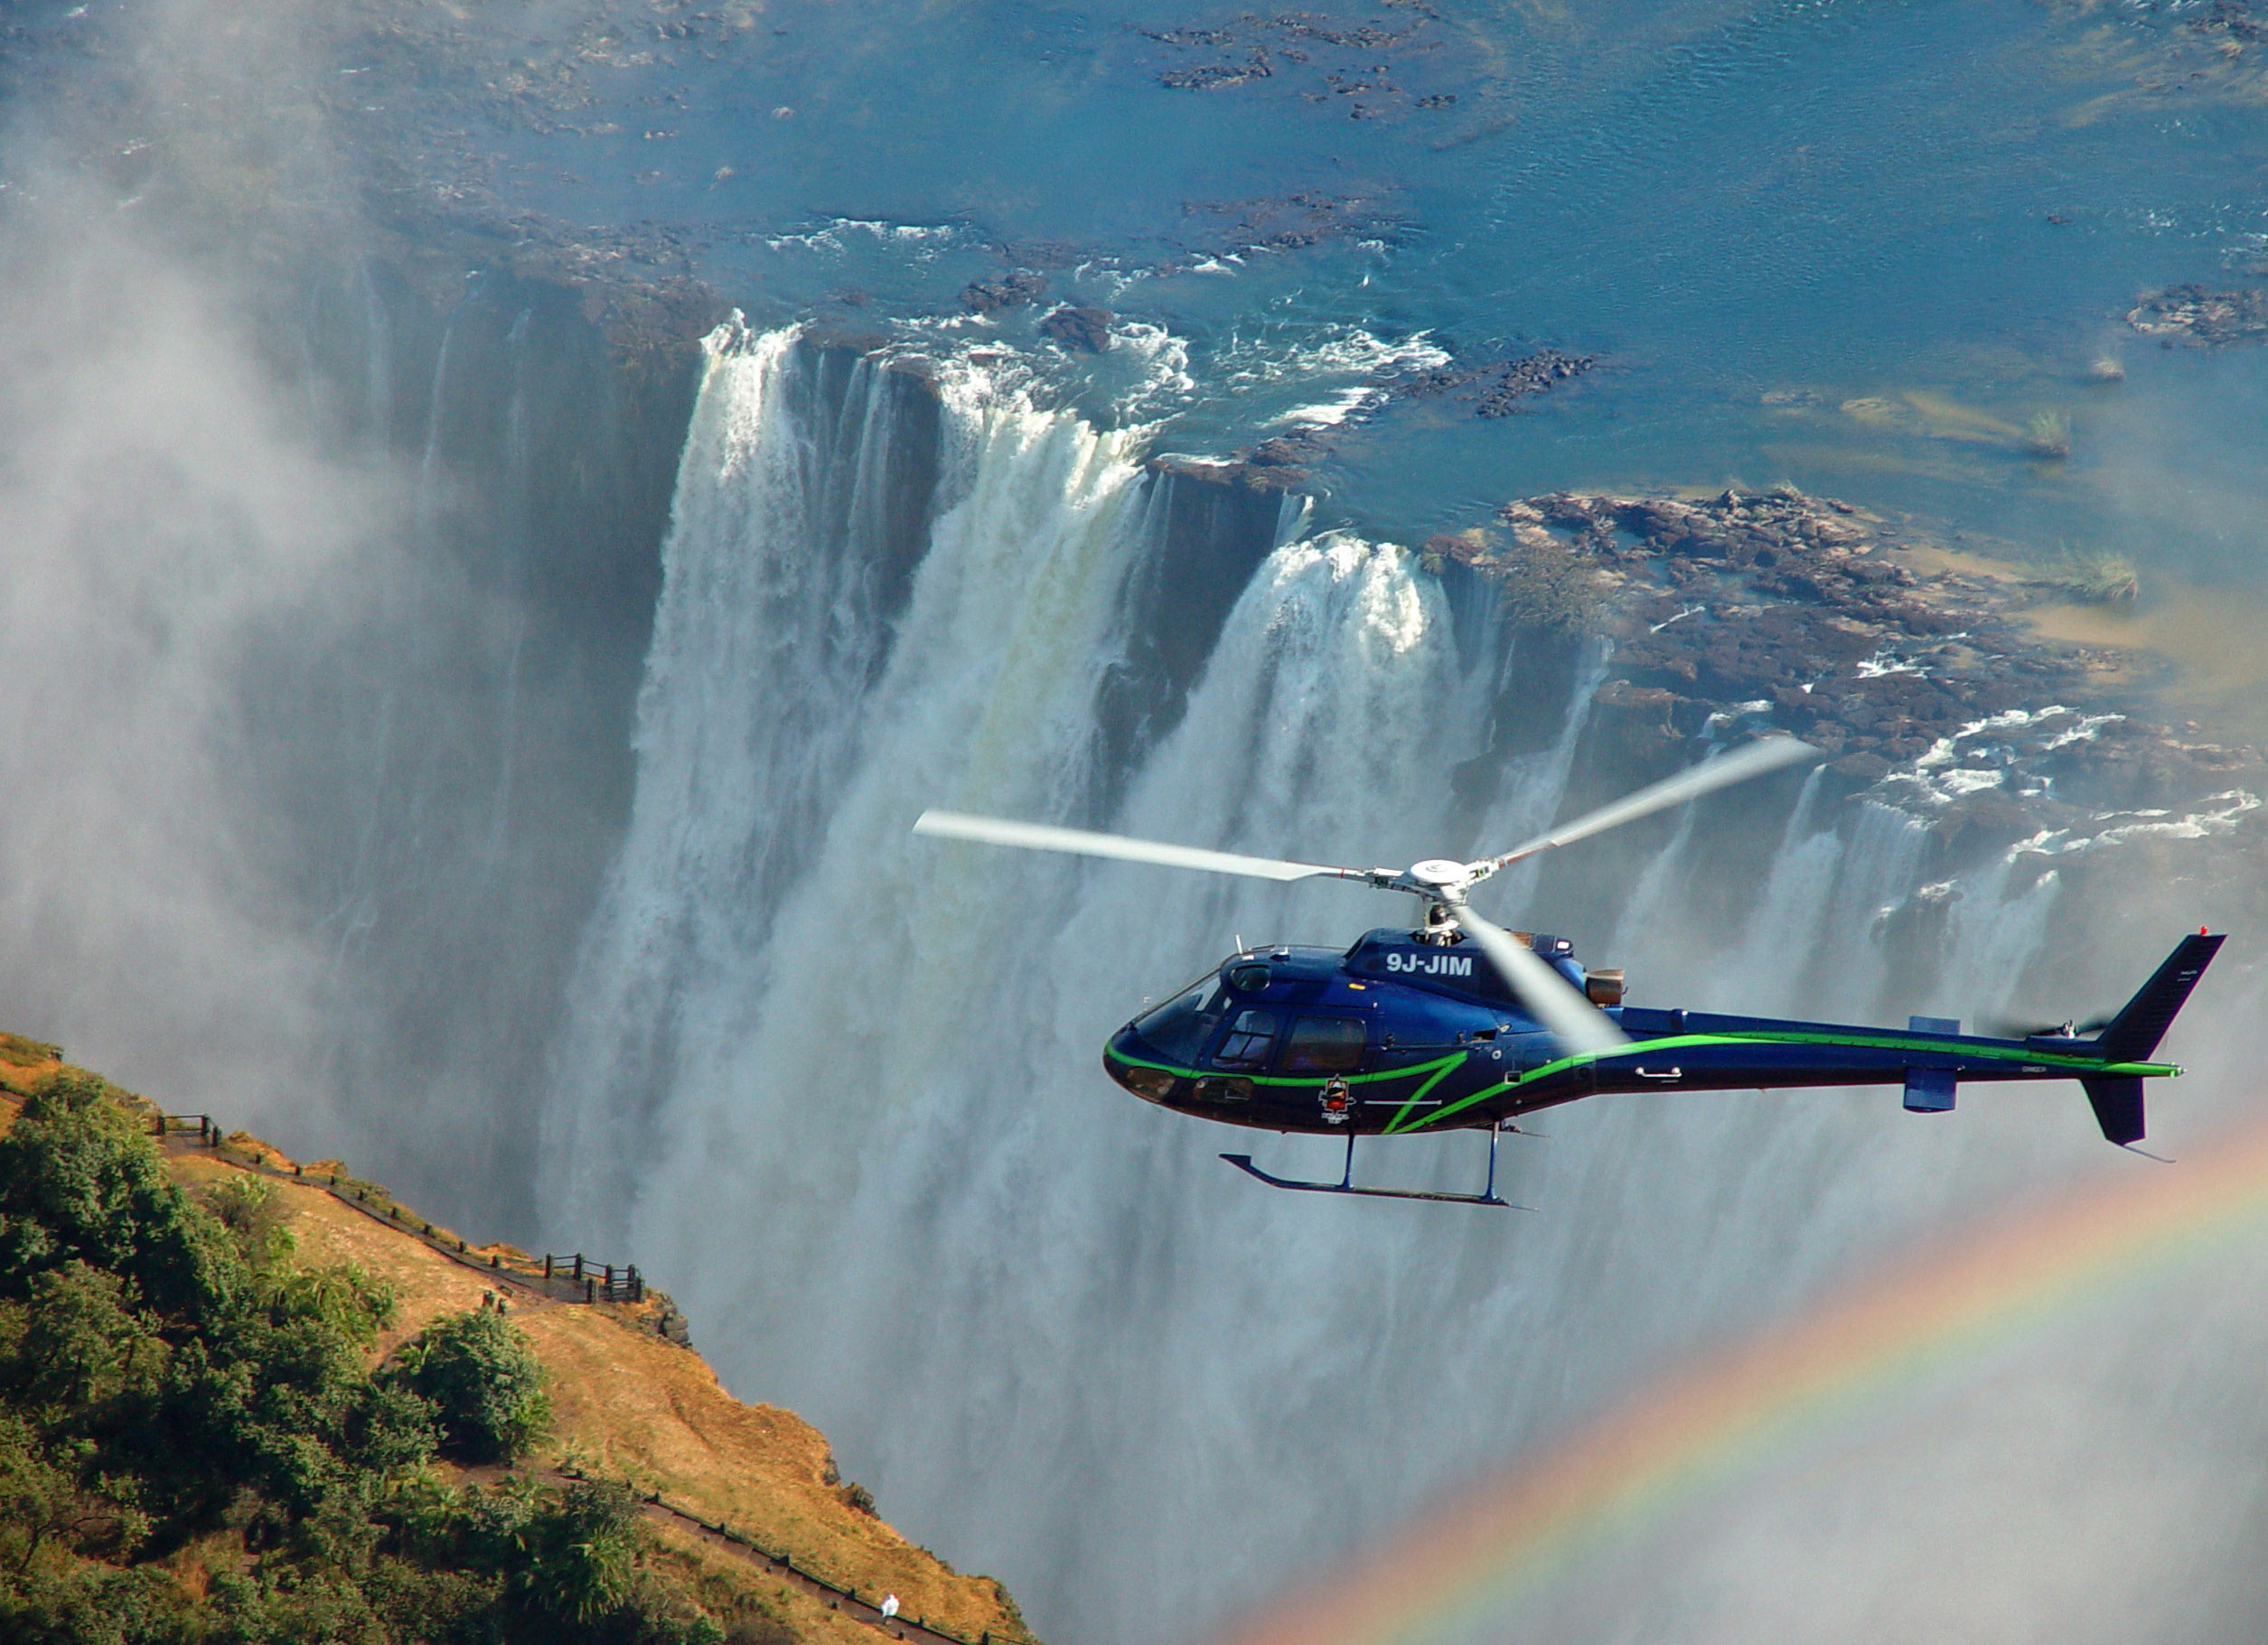 15-Minute Helicopter Flight Over The Victoria Falls in Zimbabwe, Africa | Helicopter Sport - Rated 1